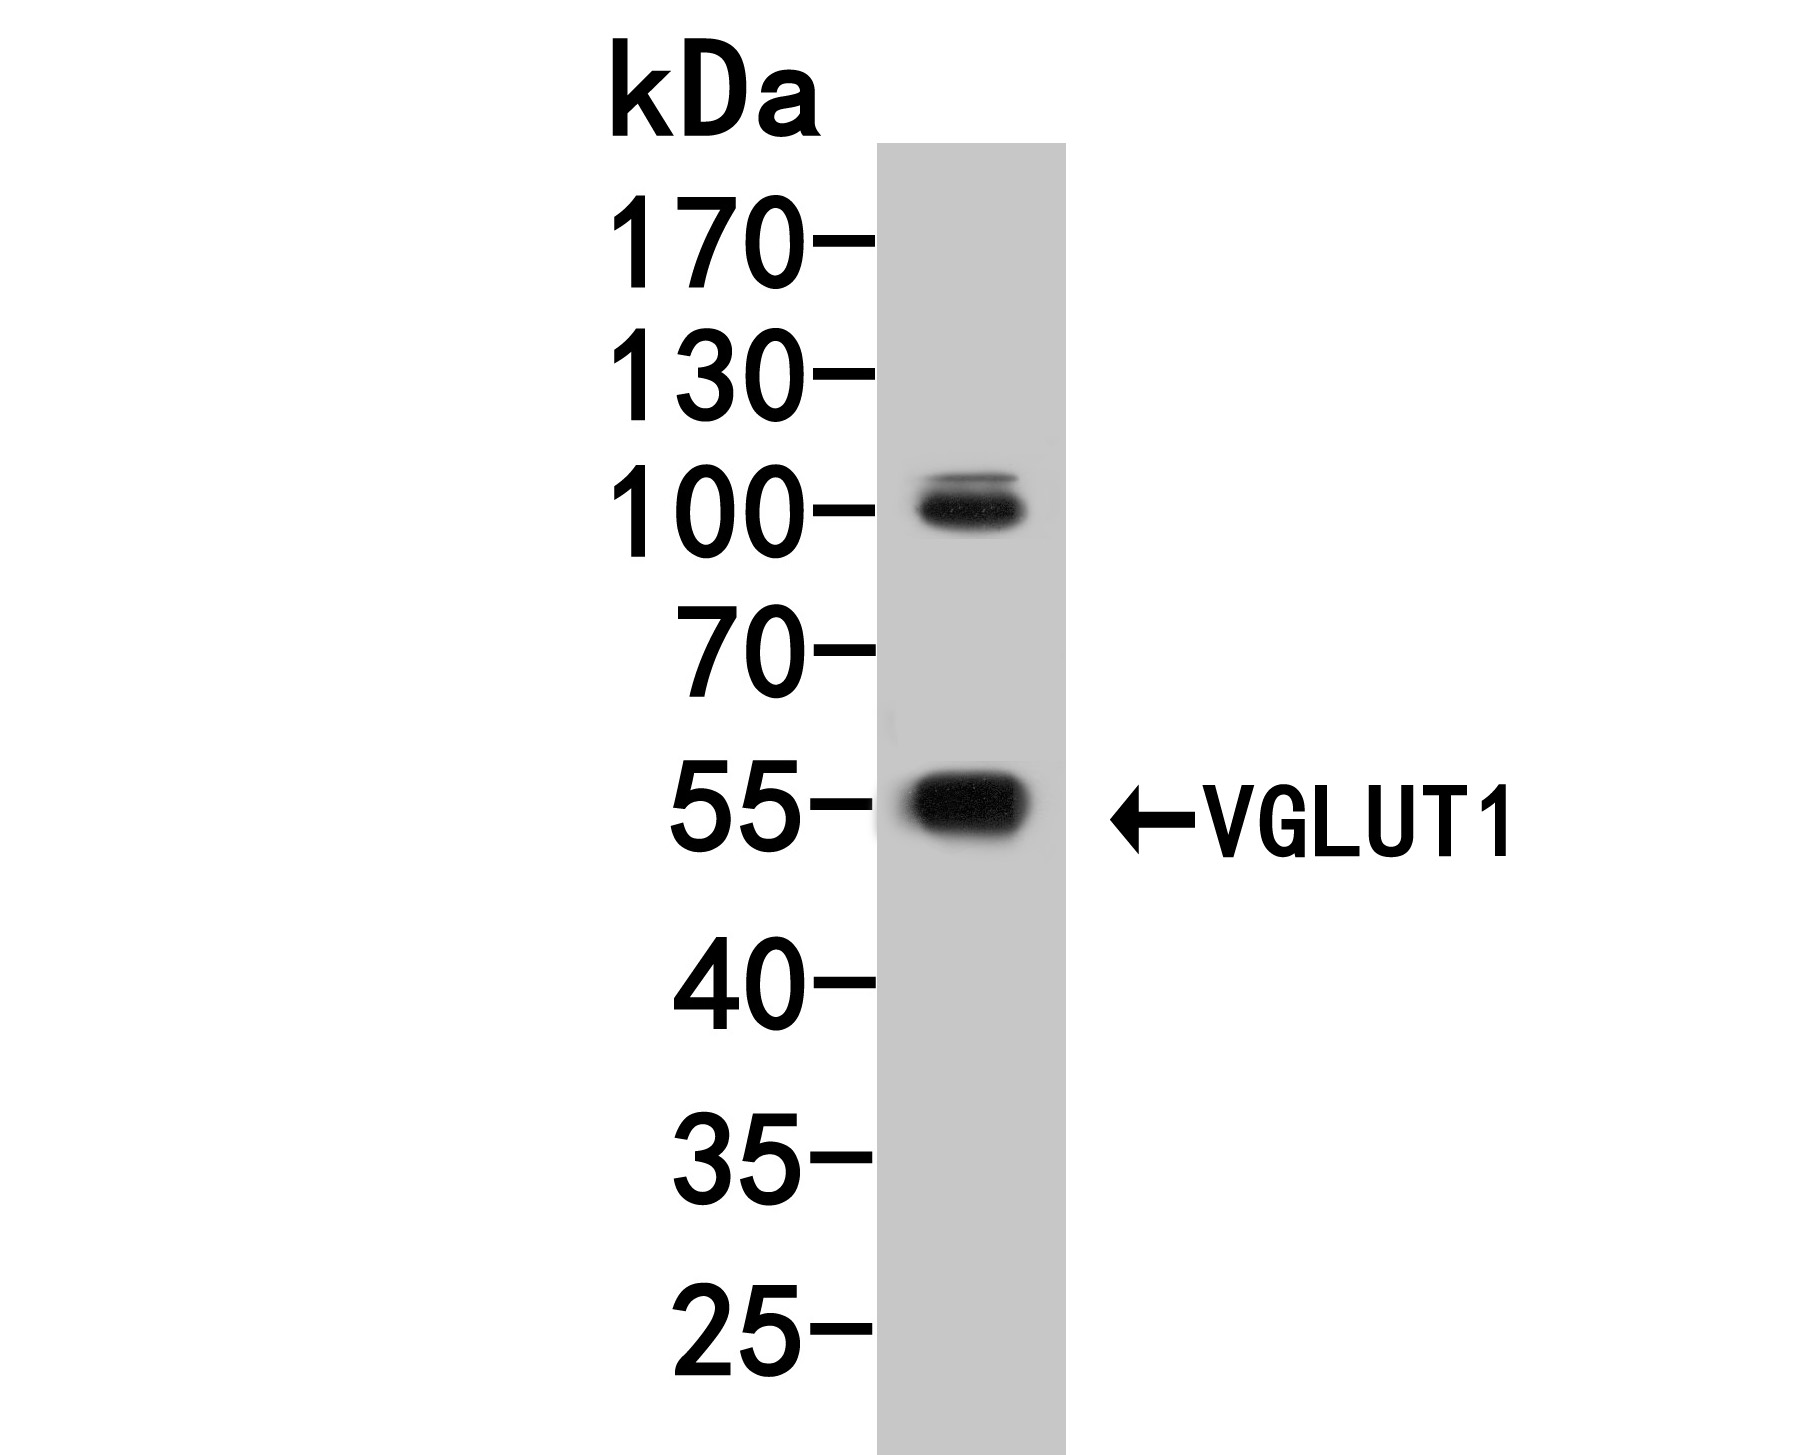 Western blot analysis of VGluT1 on rat brain tissue lysate. Proteins were transferred to a PVDF membrane and blocked with 5% BSA in PBS for 1 hour at room temperature. The primary antibody (HA500083, 1/200,000) was used in 5% BSA at room temperature for 2 hours. Goat Anti-Rabbit IgG - HRP Secondary Antibody (HA1001) at 1:5,000 dilution was used for 1 hour at room temperature.